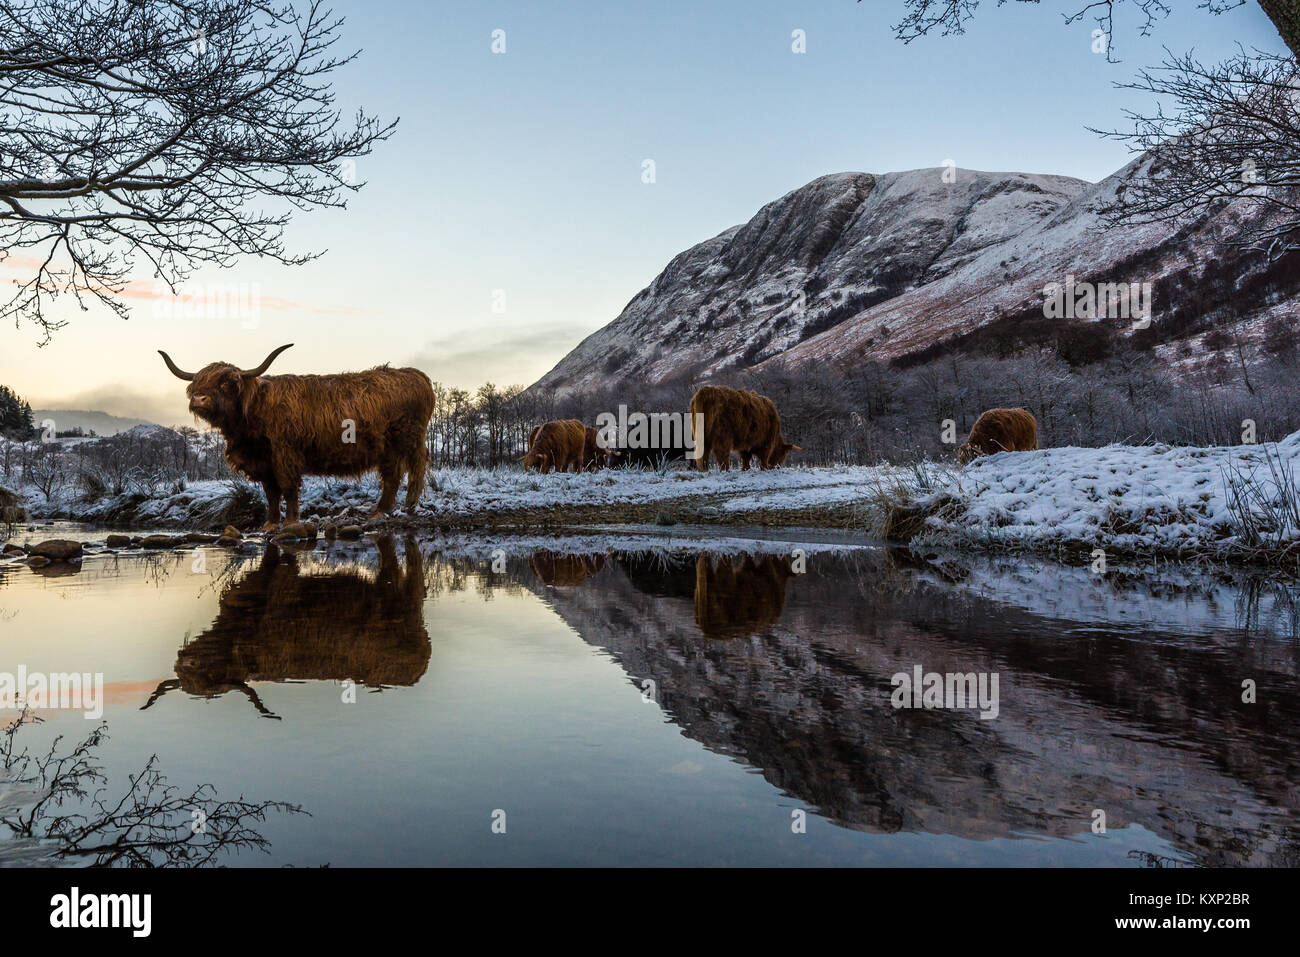 Highland mucche in inverno Foto Stock